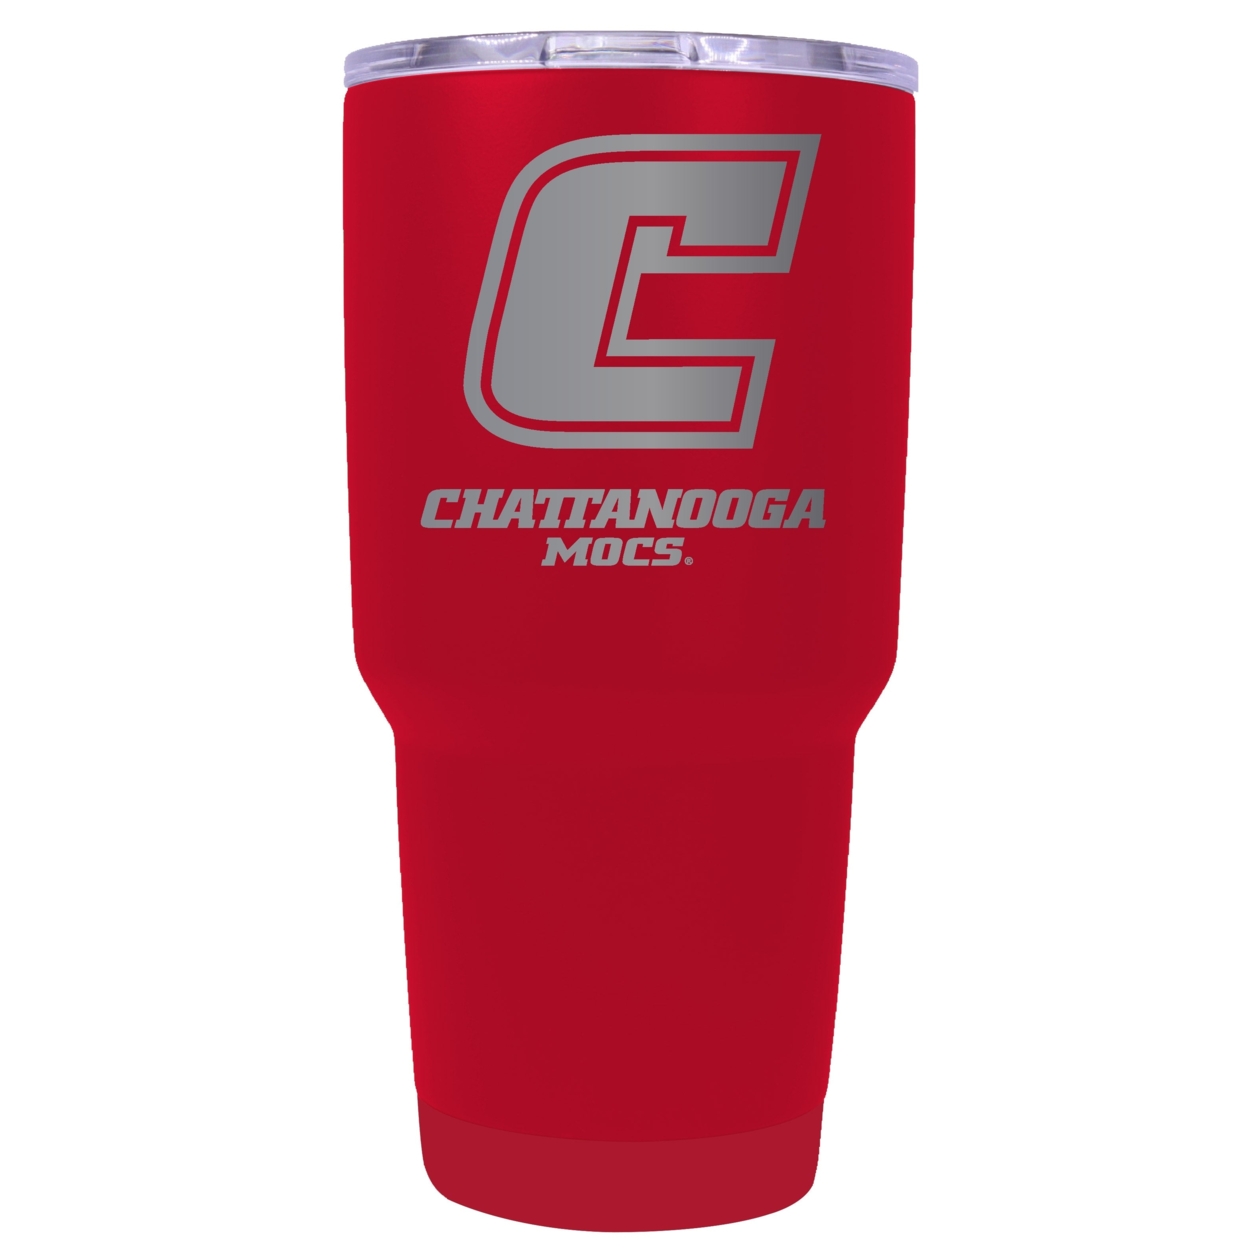 University Of Tennessee At Chattanooga 24 Oz Laser Engraved Stainless Steel Insulated Tumbler - Choose Your Color. - Coral